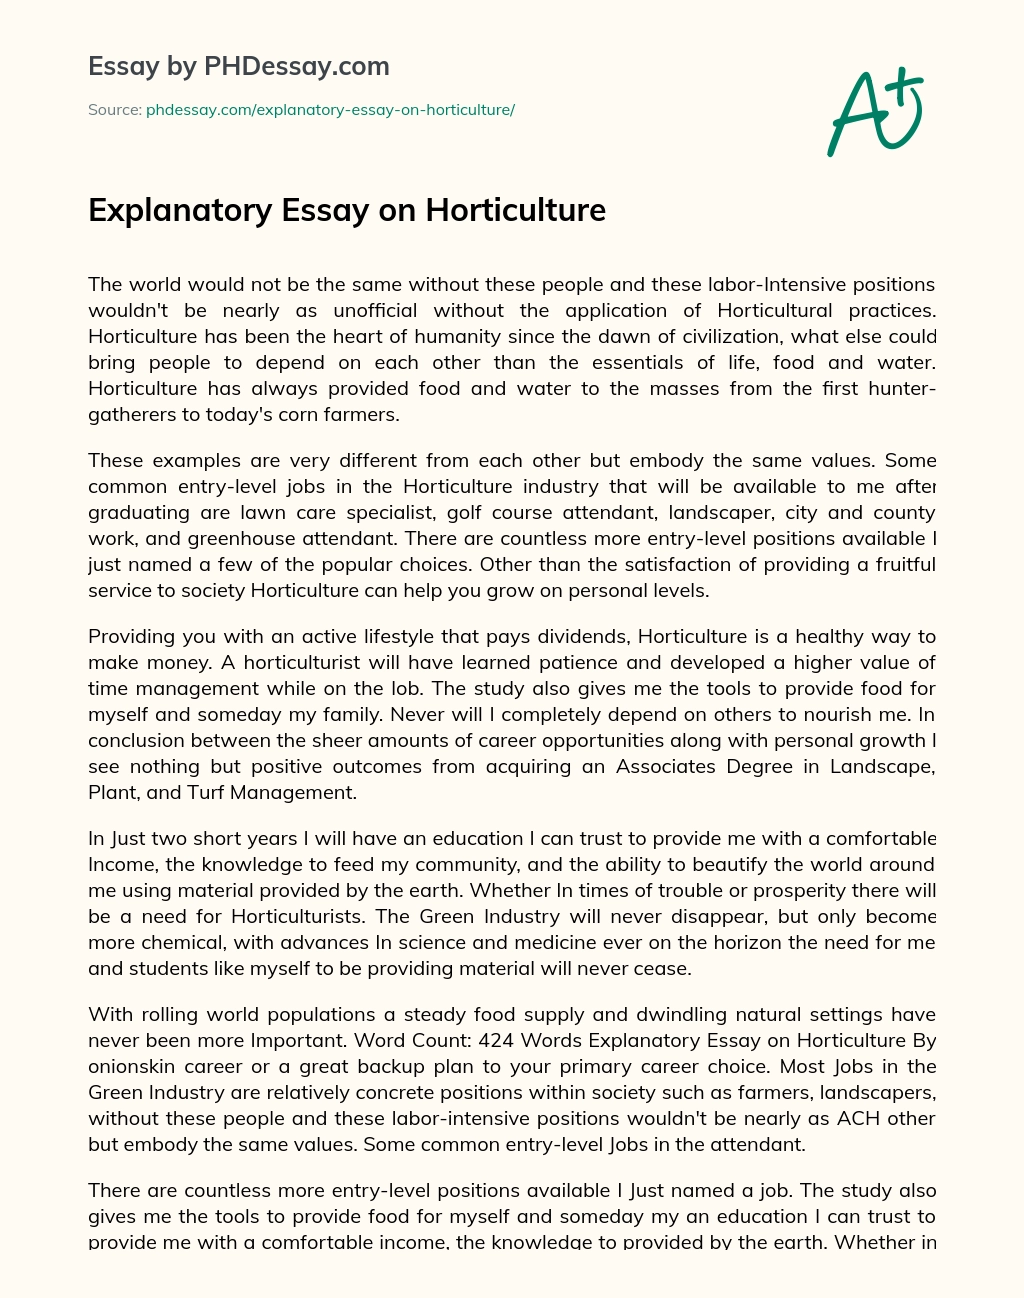 Explanatory Essay on Horticulture essay